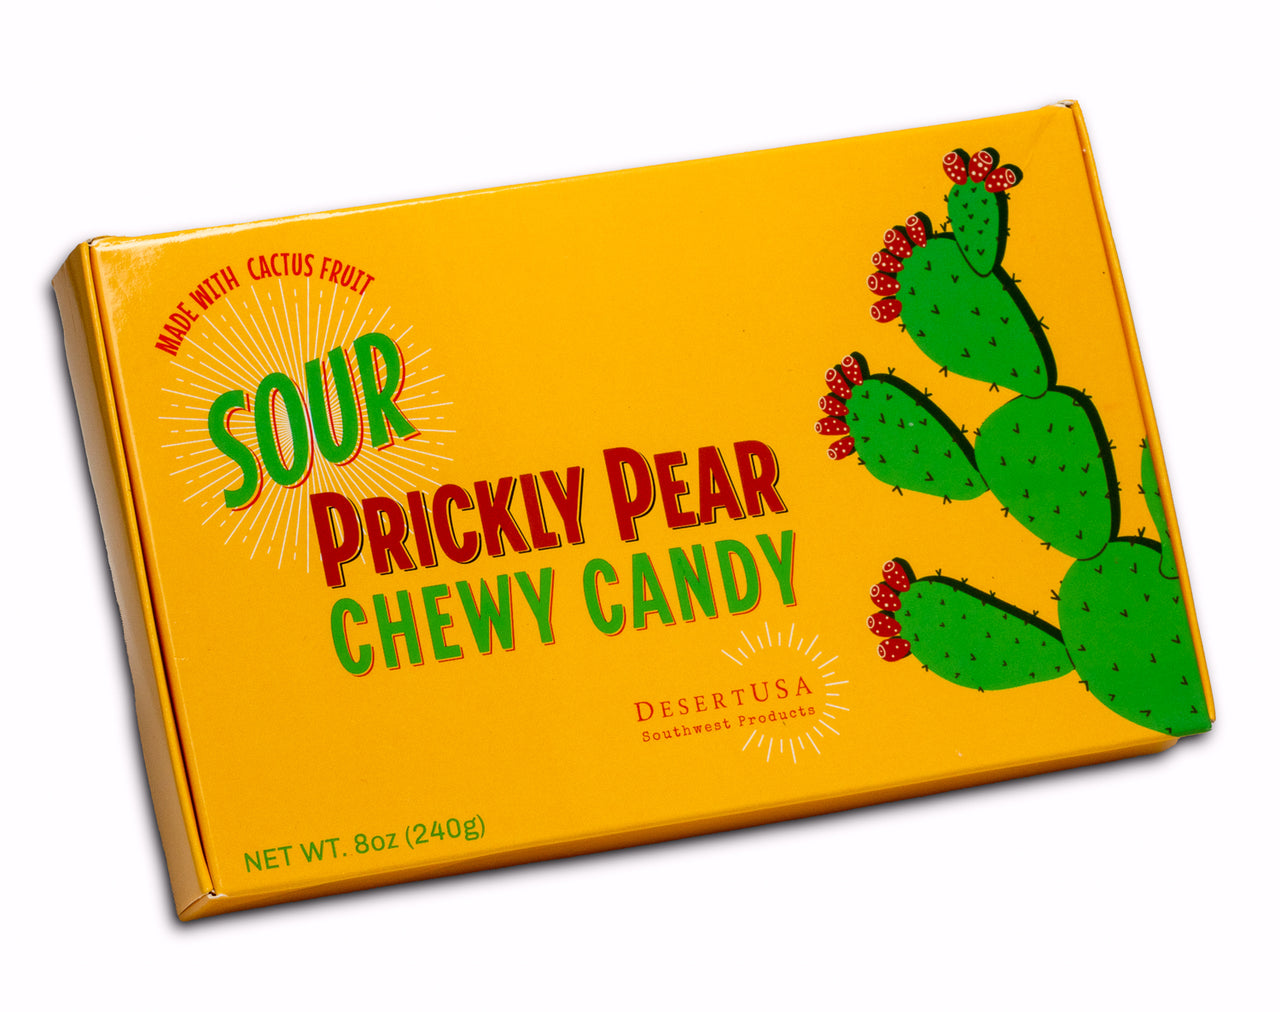 DesertUSA SOUR Prickly Pear Chewy Candy - Made from Natural Cactus Fruit